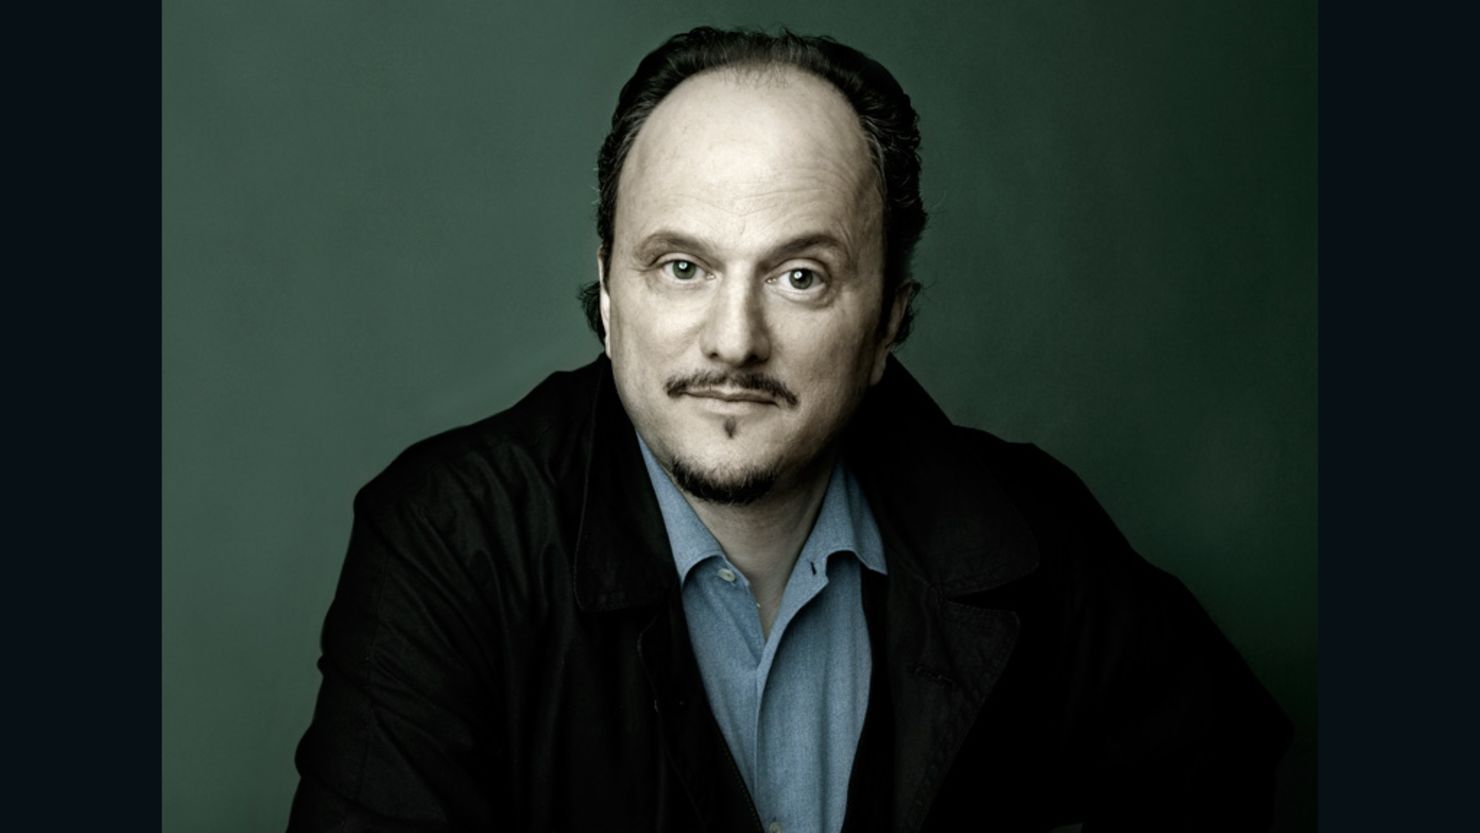 Author of "The Marriage Plo"t and winner of the Pulitzer Prize, Jeffrey Eugenides reveals how to find the inspiration that can overcome fear and anxiety—and let you thrive.